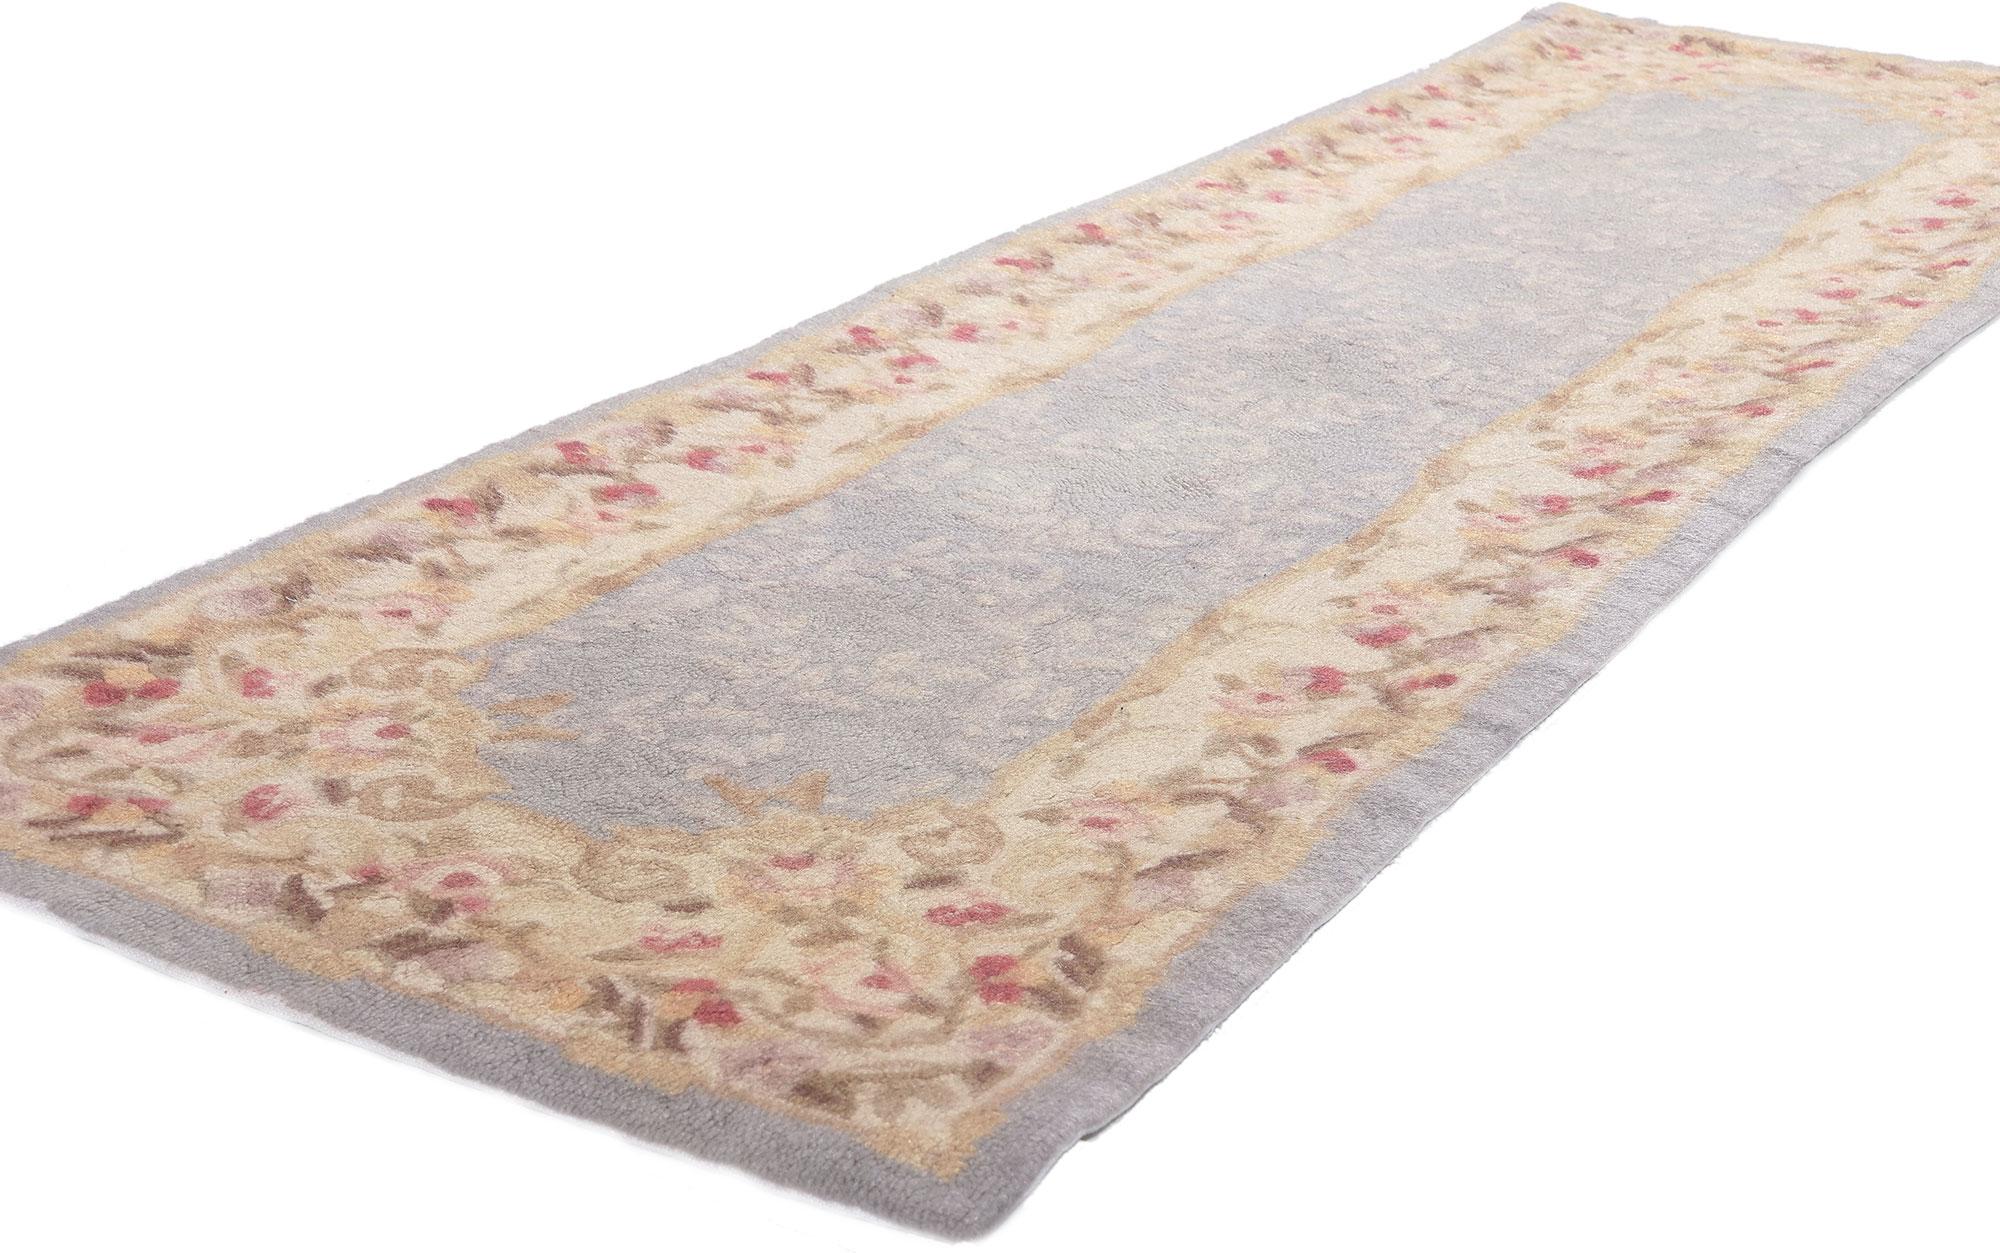 78553 Vintage Aubusson American Hooked Rug, 02'02 x 07'03.
Take a floral design and understated elegance, mix in a dash of romantic connotations and rustic sensibility to get this fresh look that’s as comfortable as it is chic. The composition